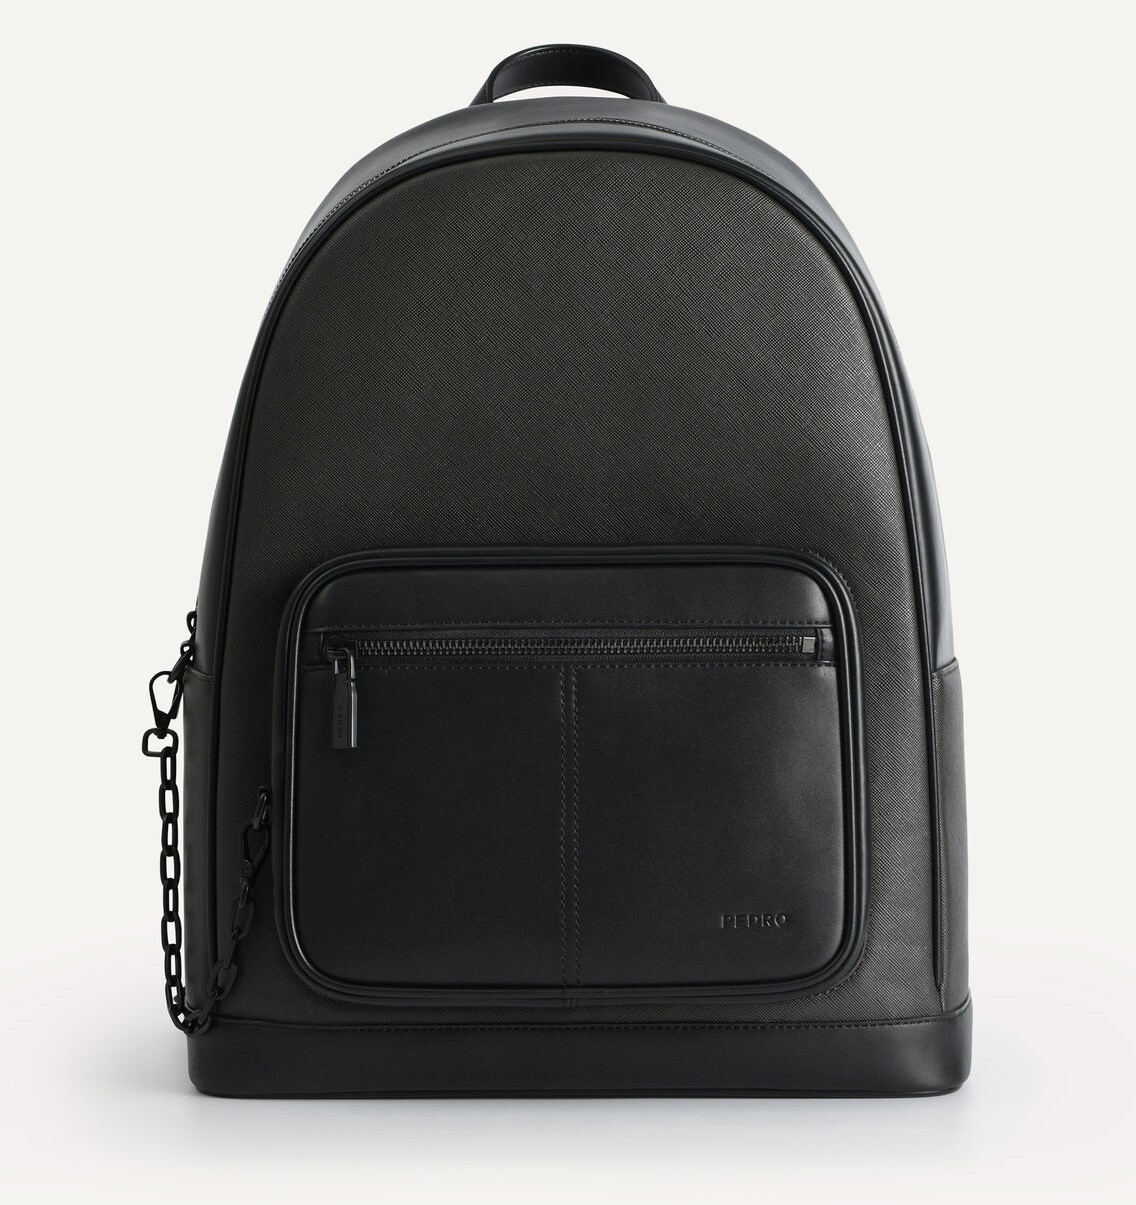 BALO NAM PEDRO STRUCTURED CHAIN BACKPACK 7